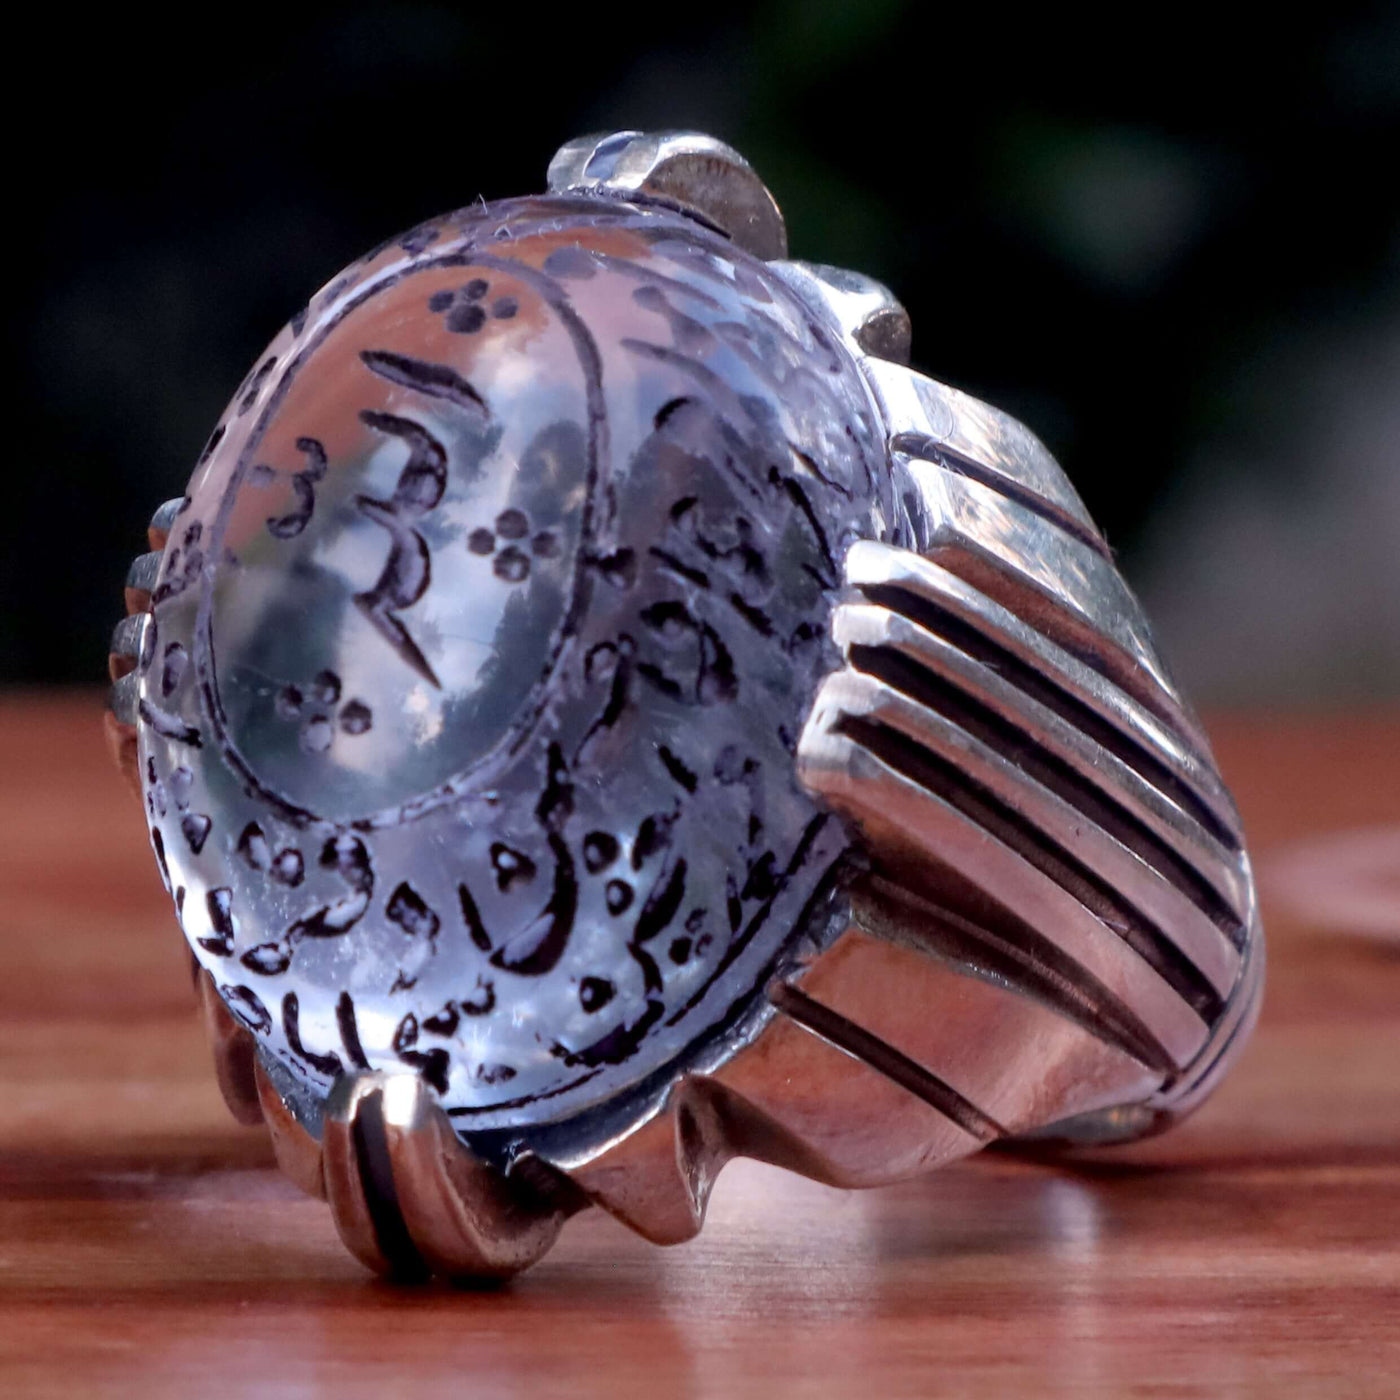 Handmade Dur e Najaf Ring Sterling Silver 92.5 | Original Dur Alnajaf Stone Engraved with Allah Named And Ahlulbayt Names with the full 12 Imams PBUT | US Size 13 - AlAliGems